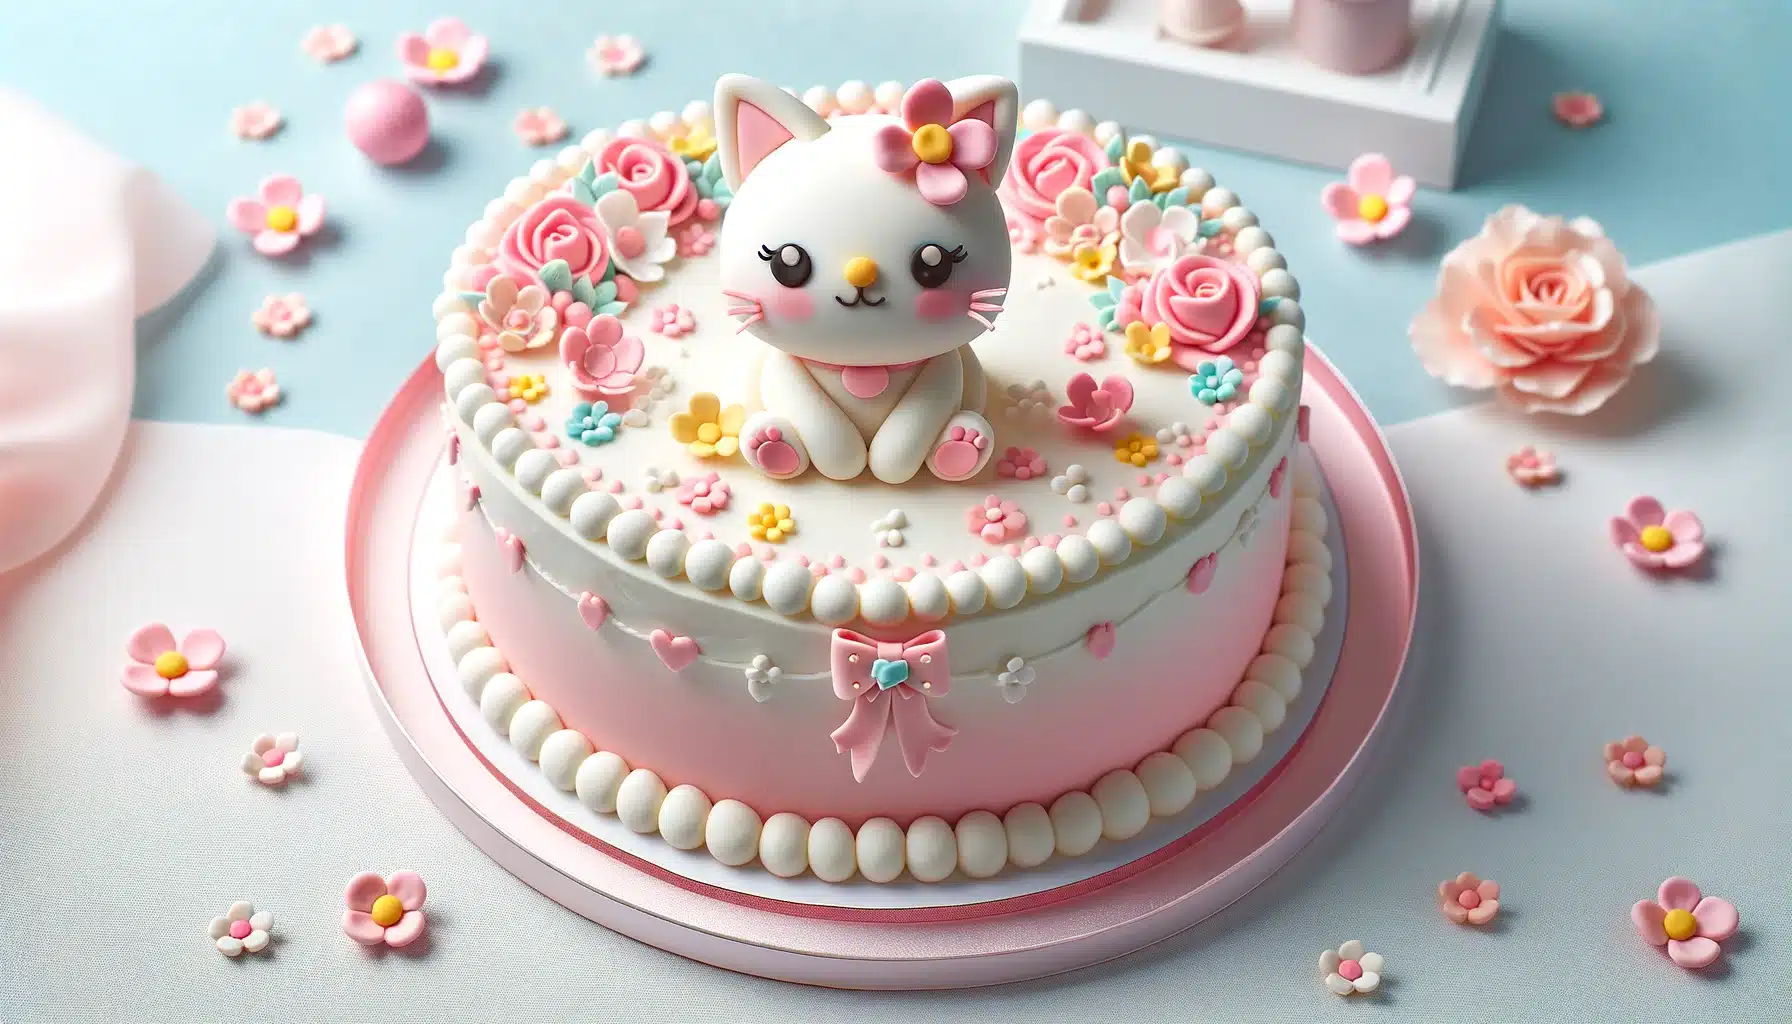 Hello Kitty Birthday Cake: How to Make the Perfect Cake for Your Child's Celebration